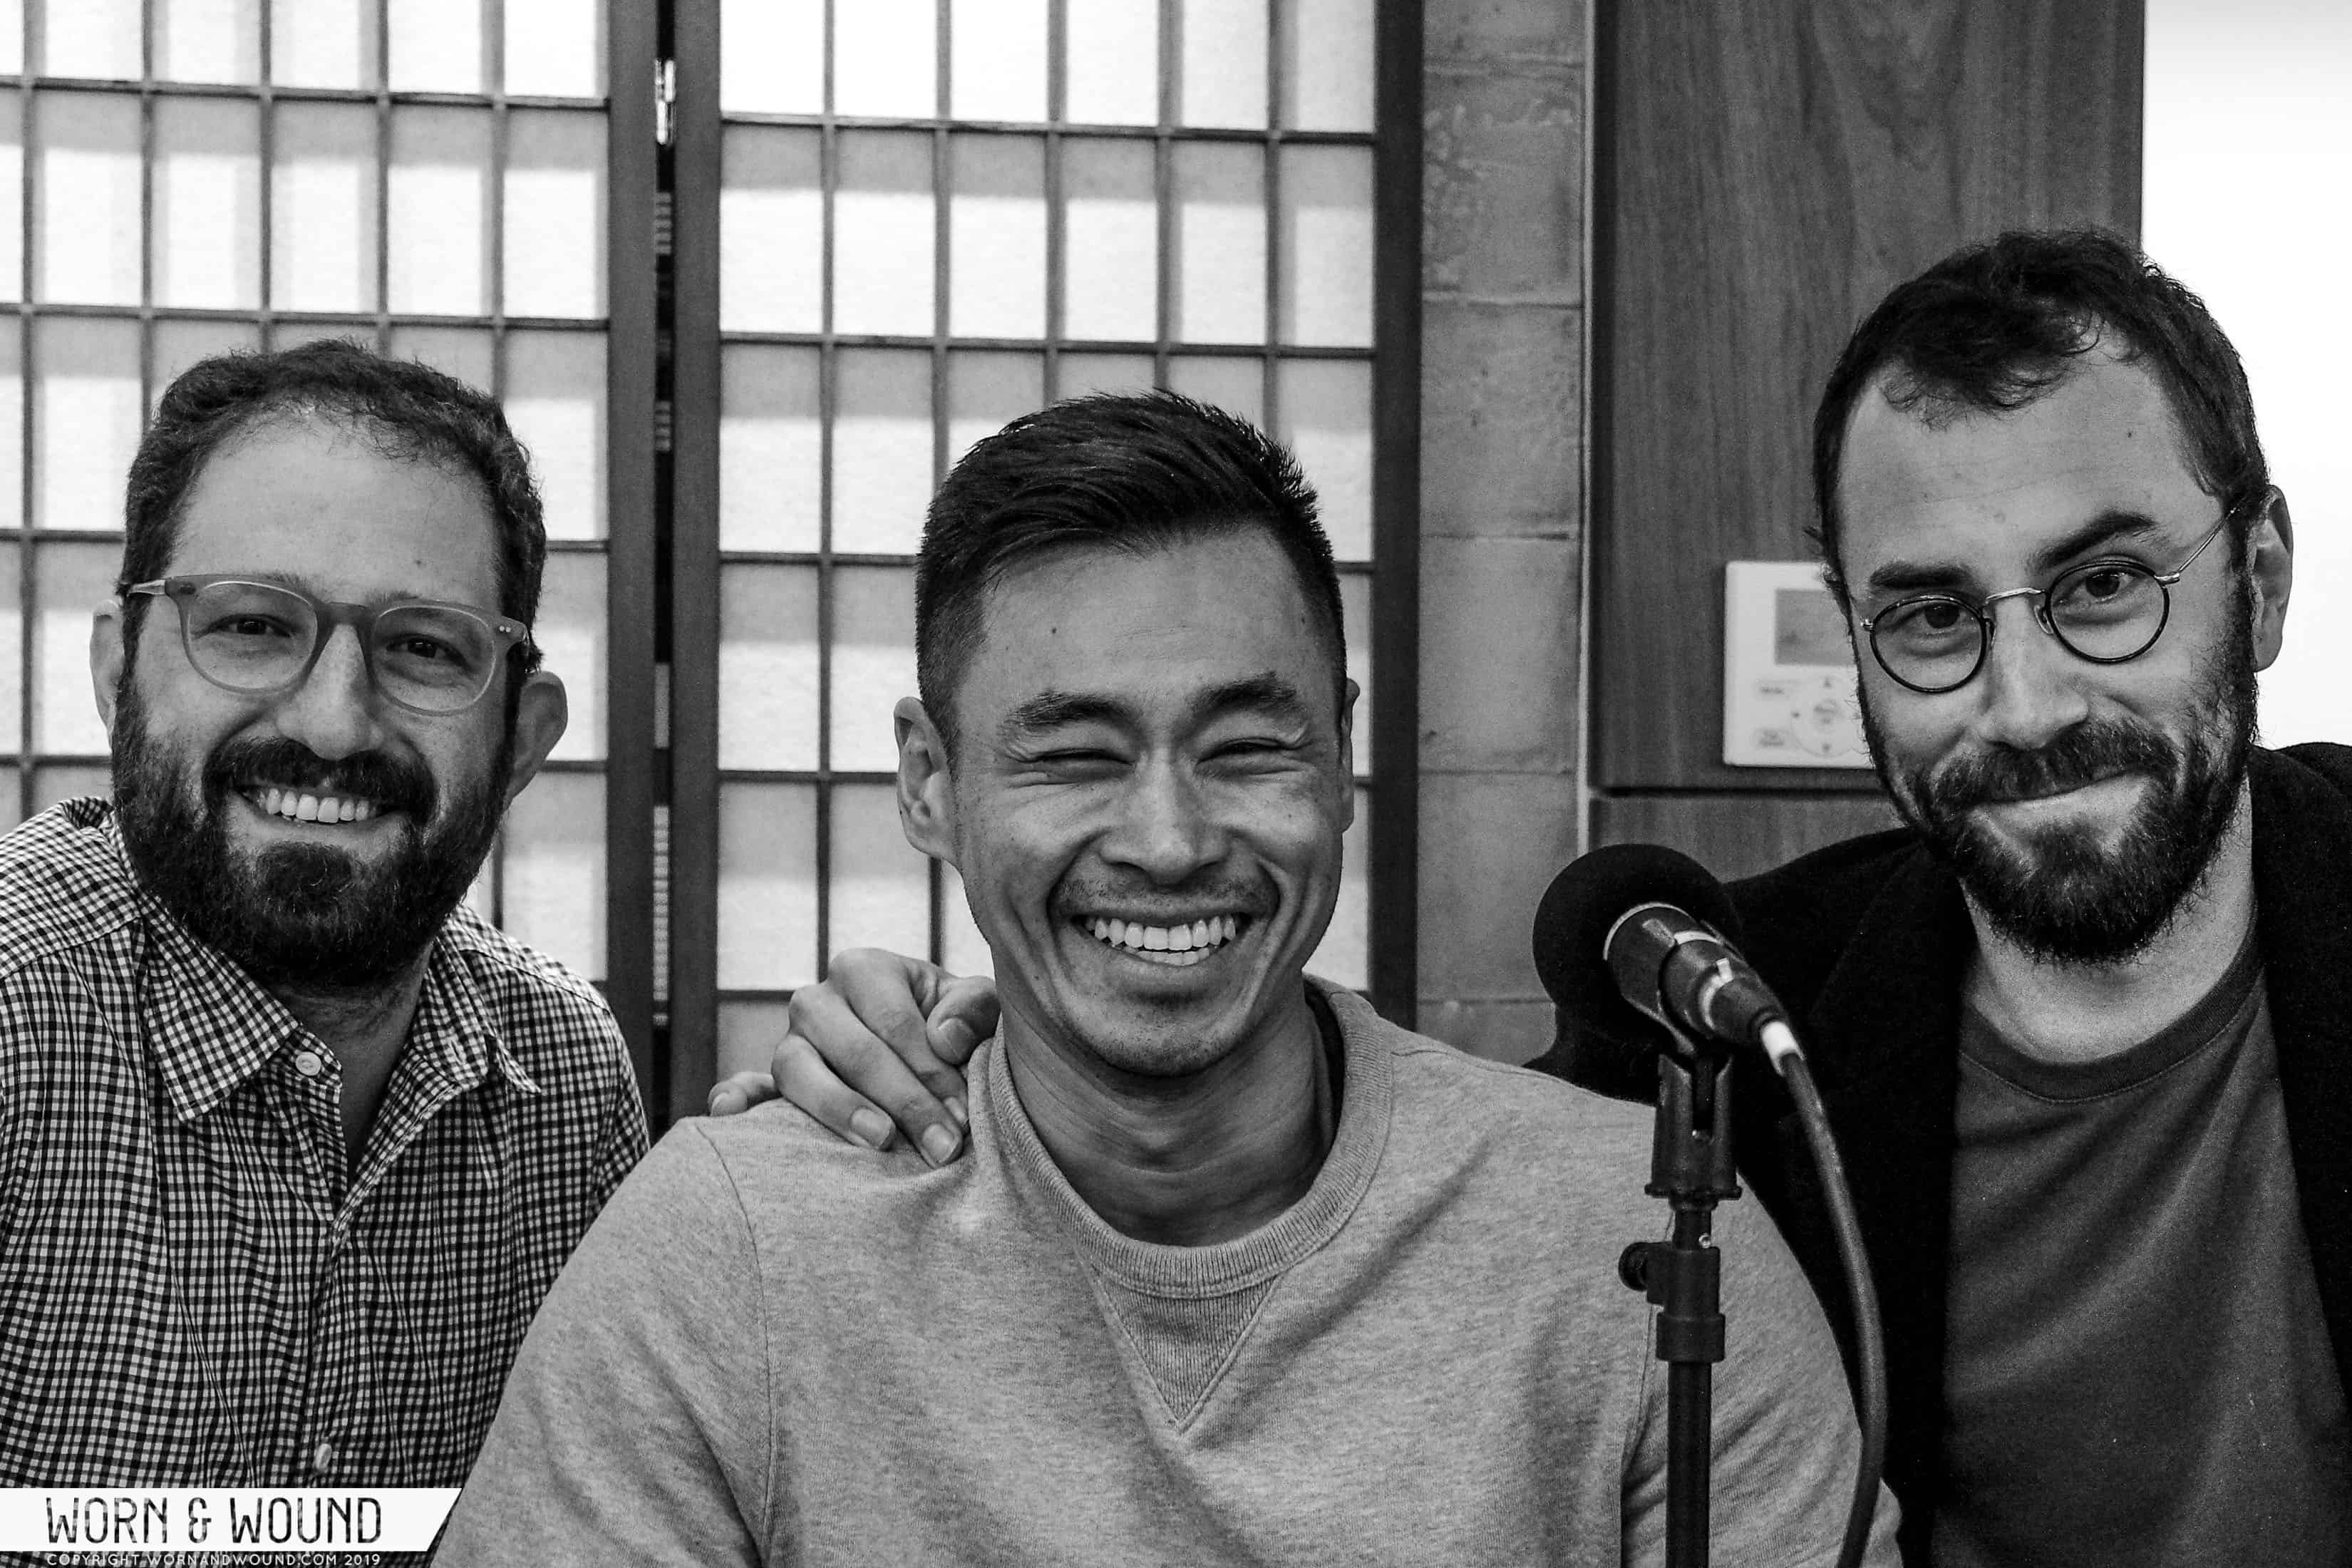 The Worn & Wound Podcast Ep. 97: Indy Brand Power Panel with Jason Lim of Halios, Bradley Price of Autodromo, and Etienne Malec of Baltic